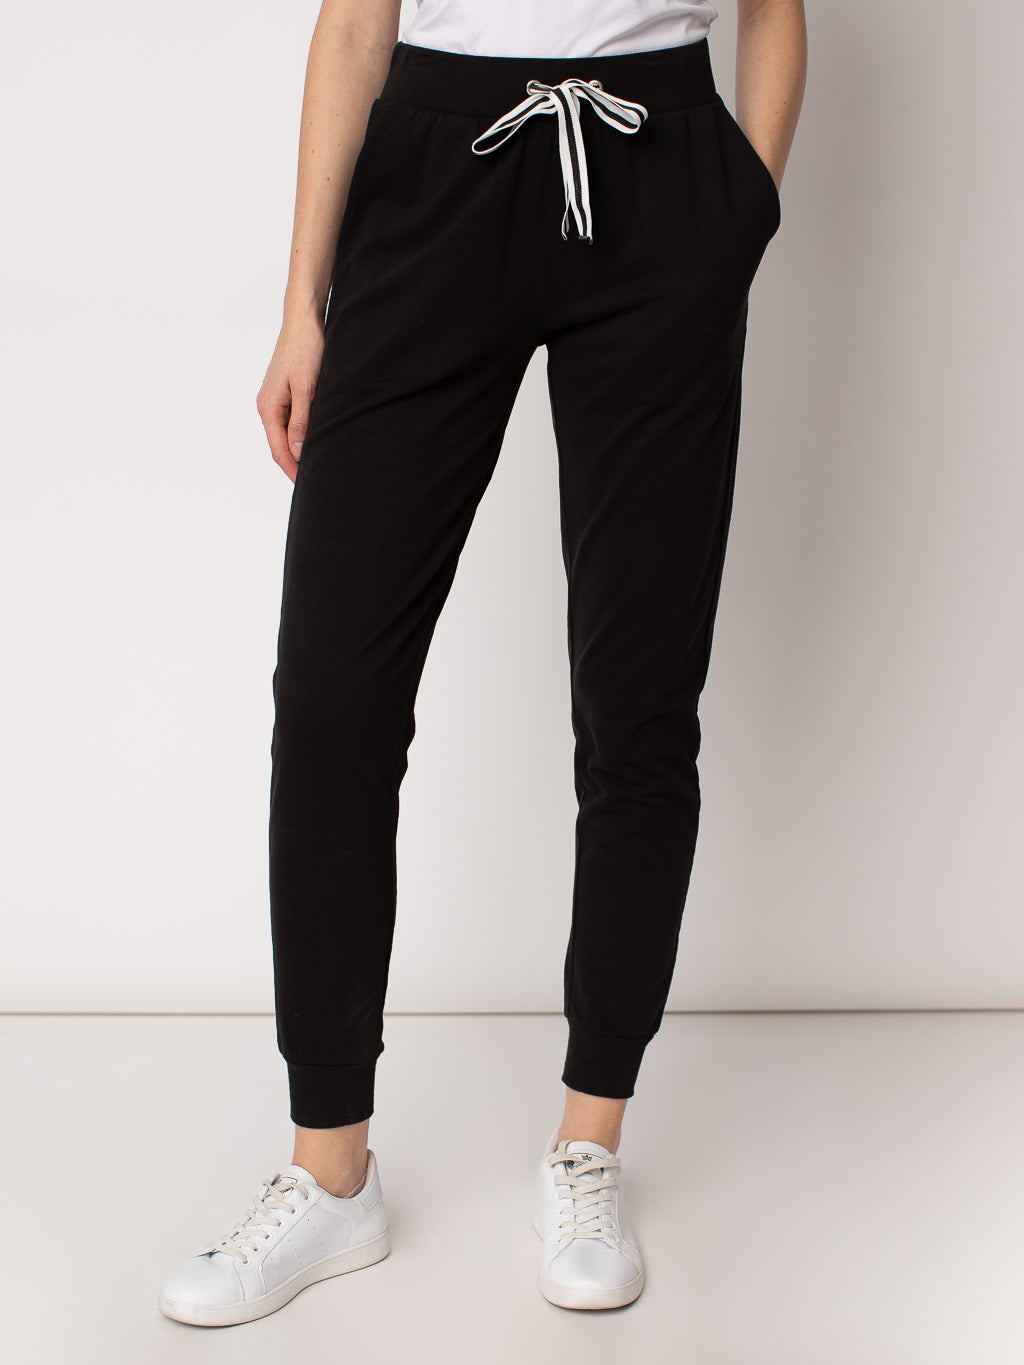 Semi-fitted lounge pant